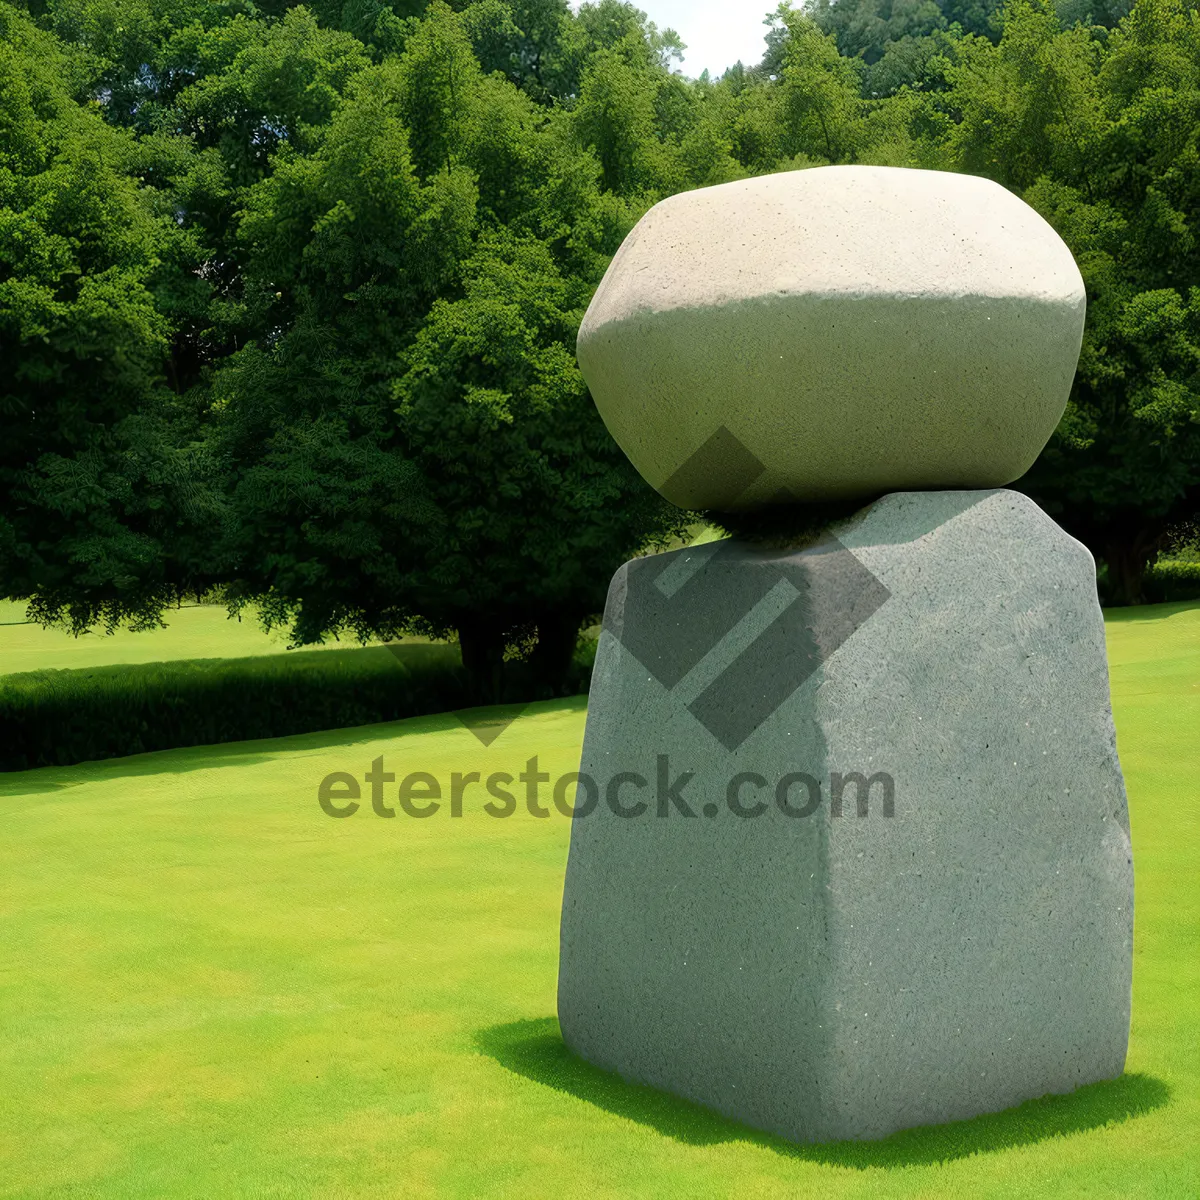 Picture of Skyline Seat on Grass Field: Ottoman Stool with Pedestal